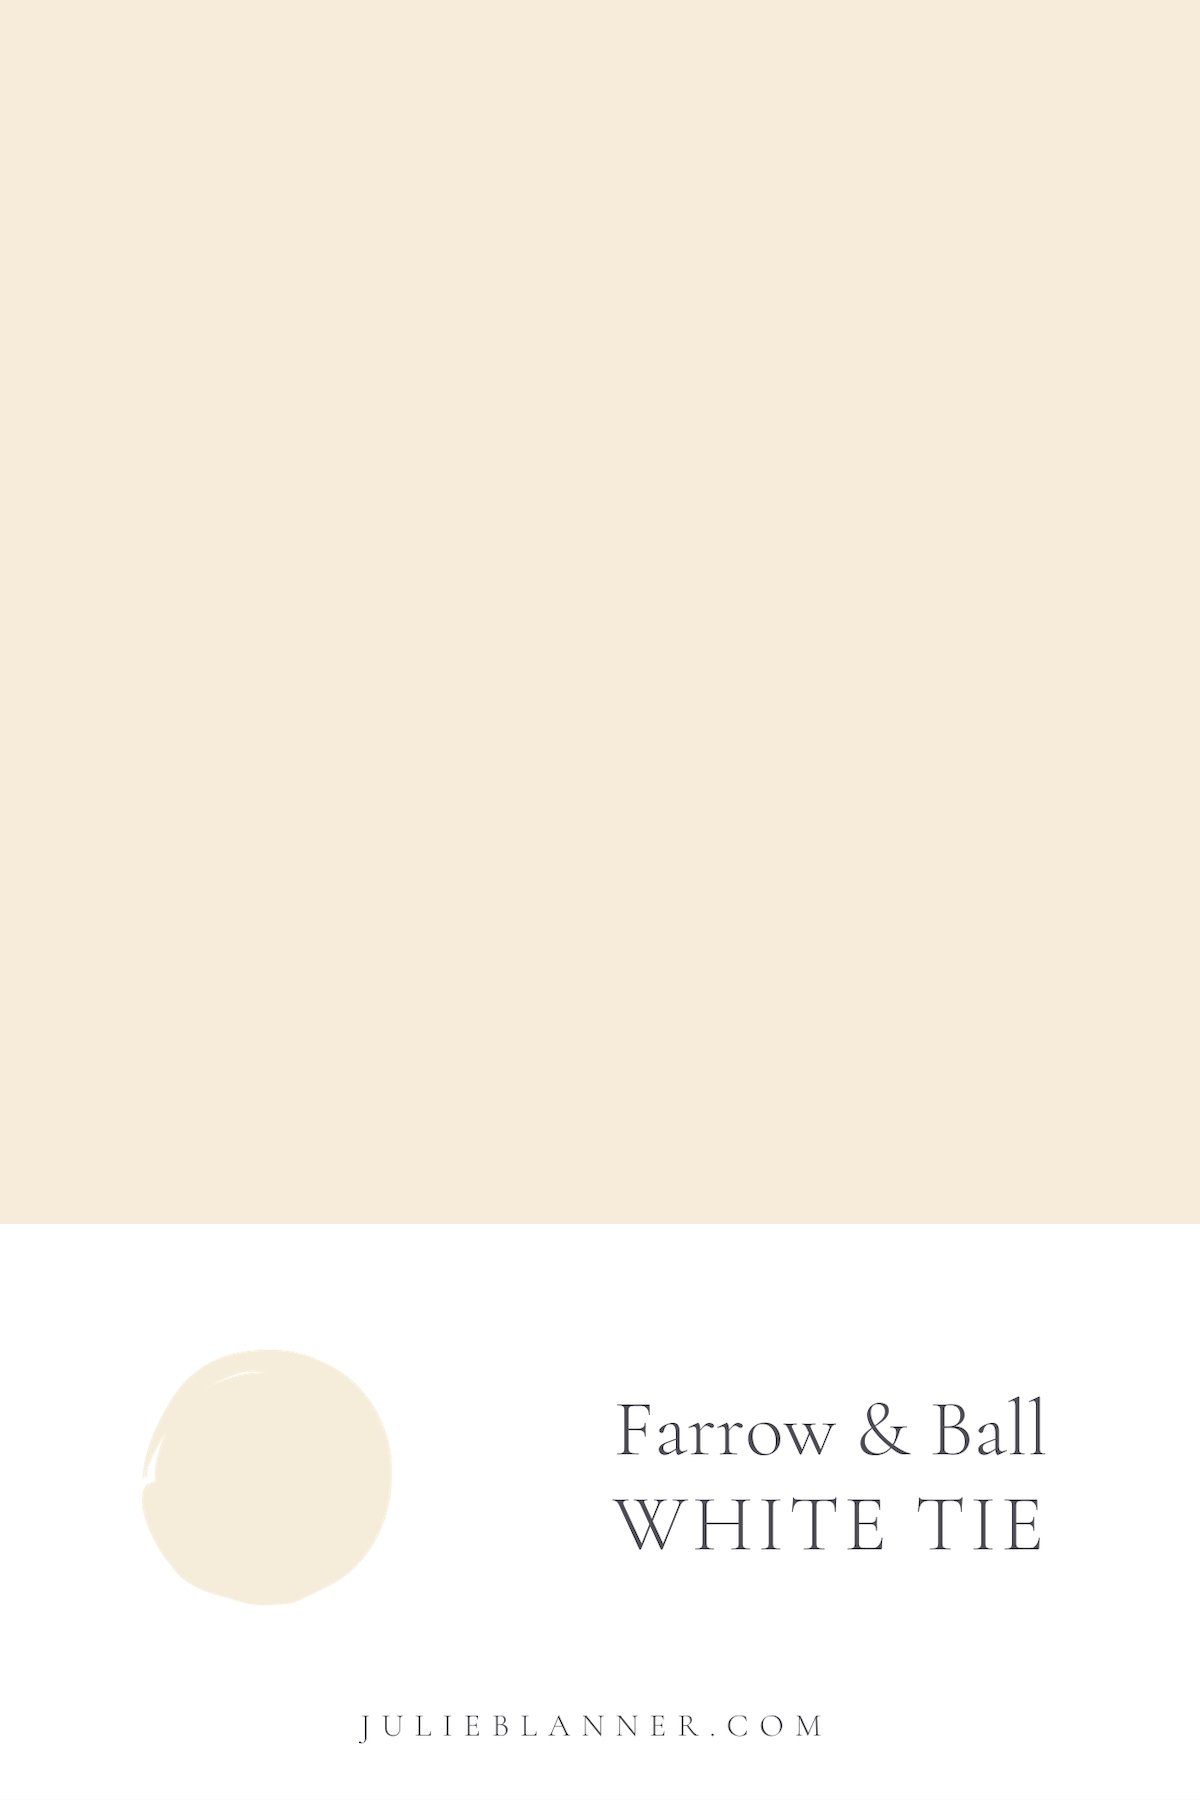 This description highlights the product "Farrow & Ball White Tie" emphasizing the keywords "White Tie.